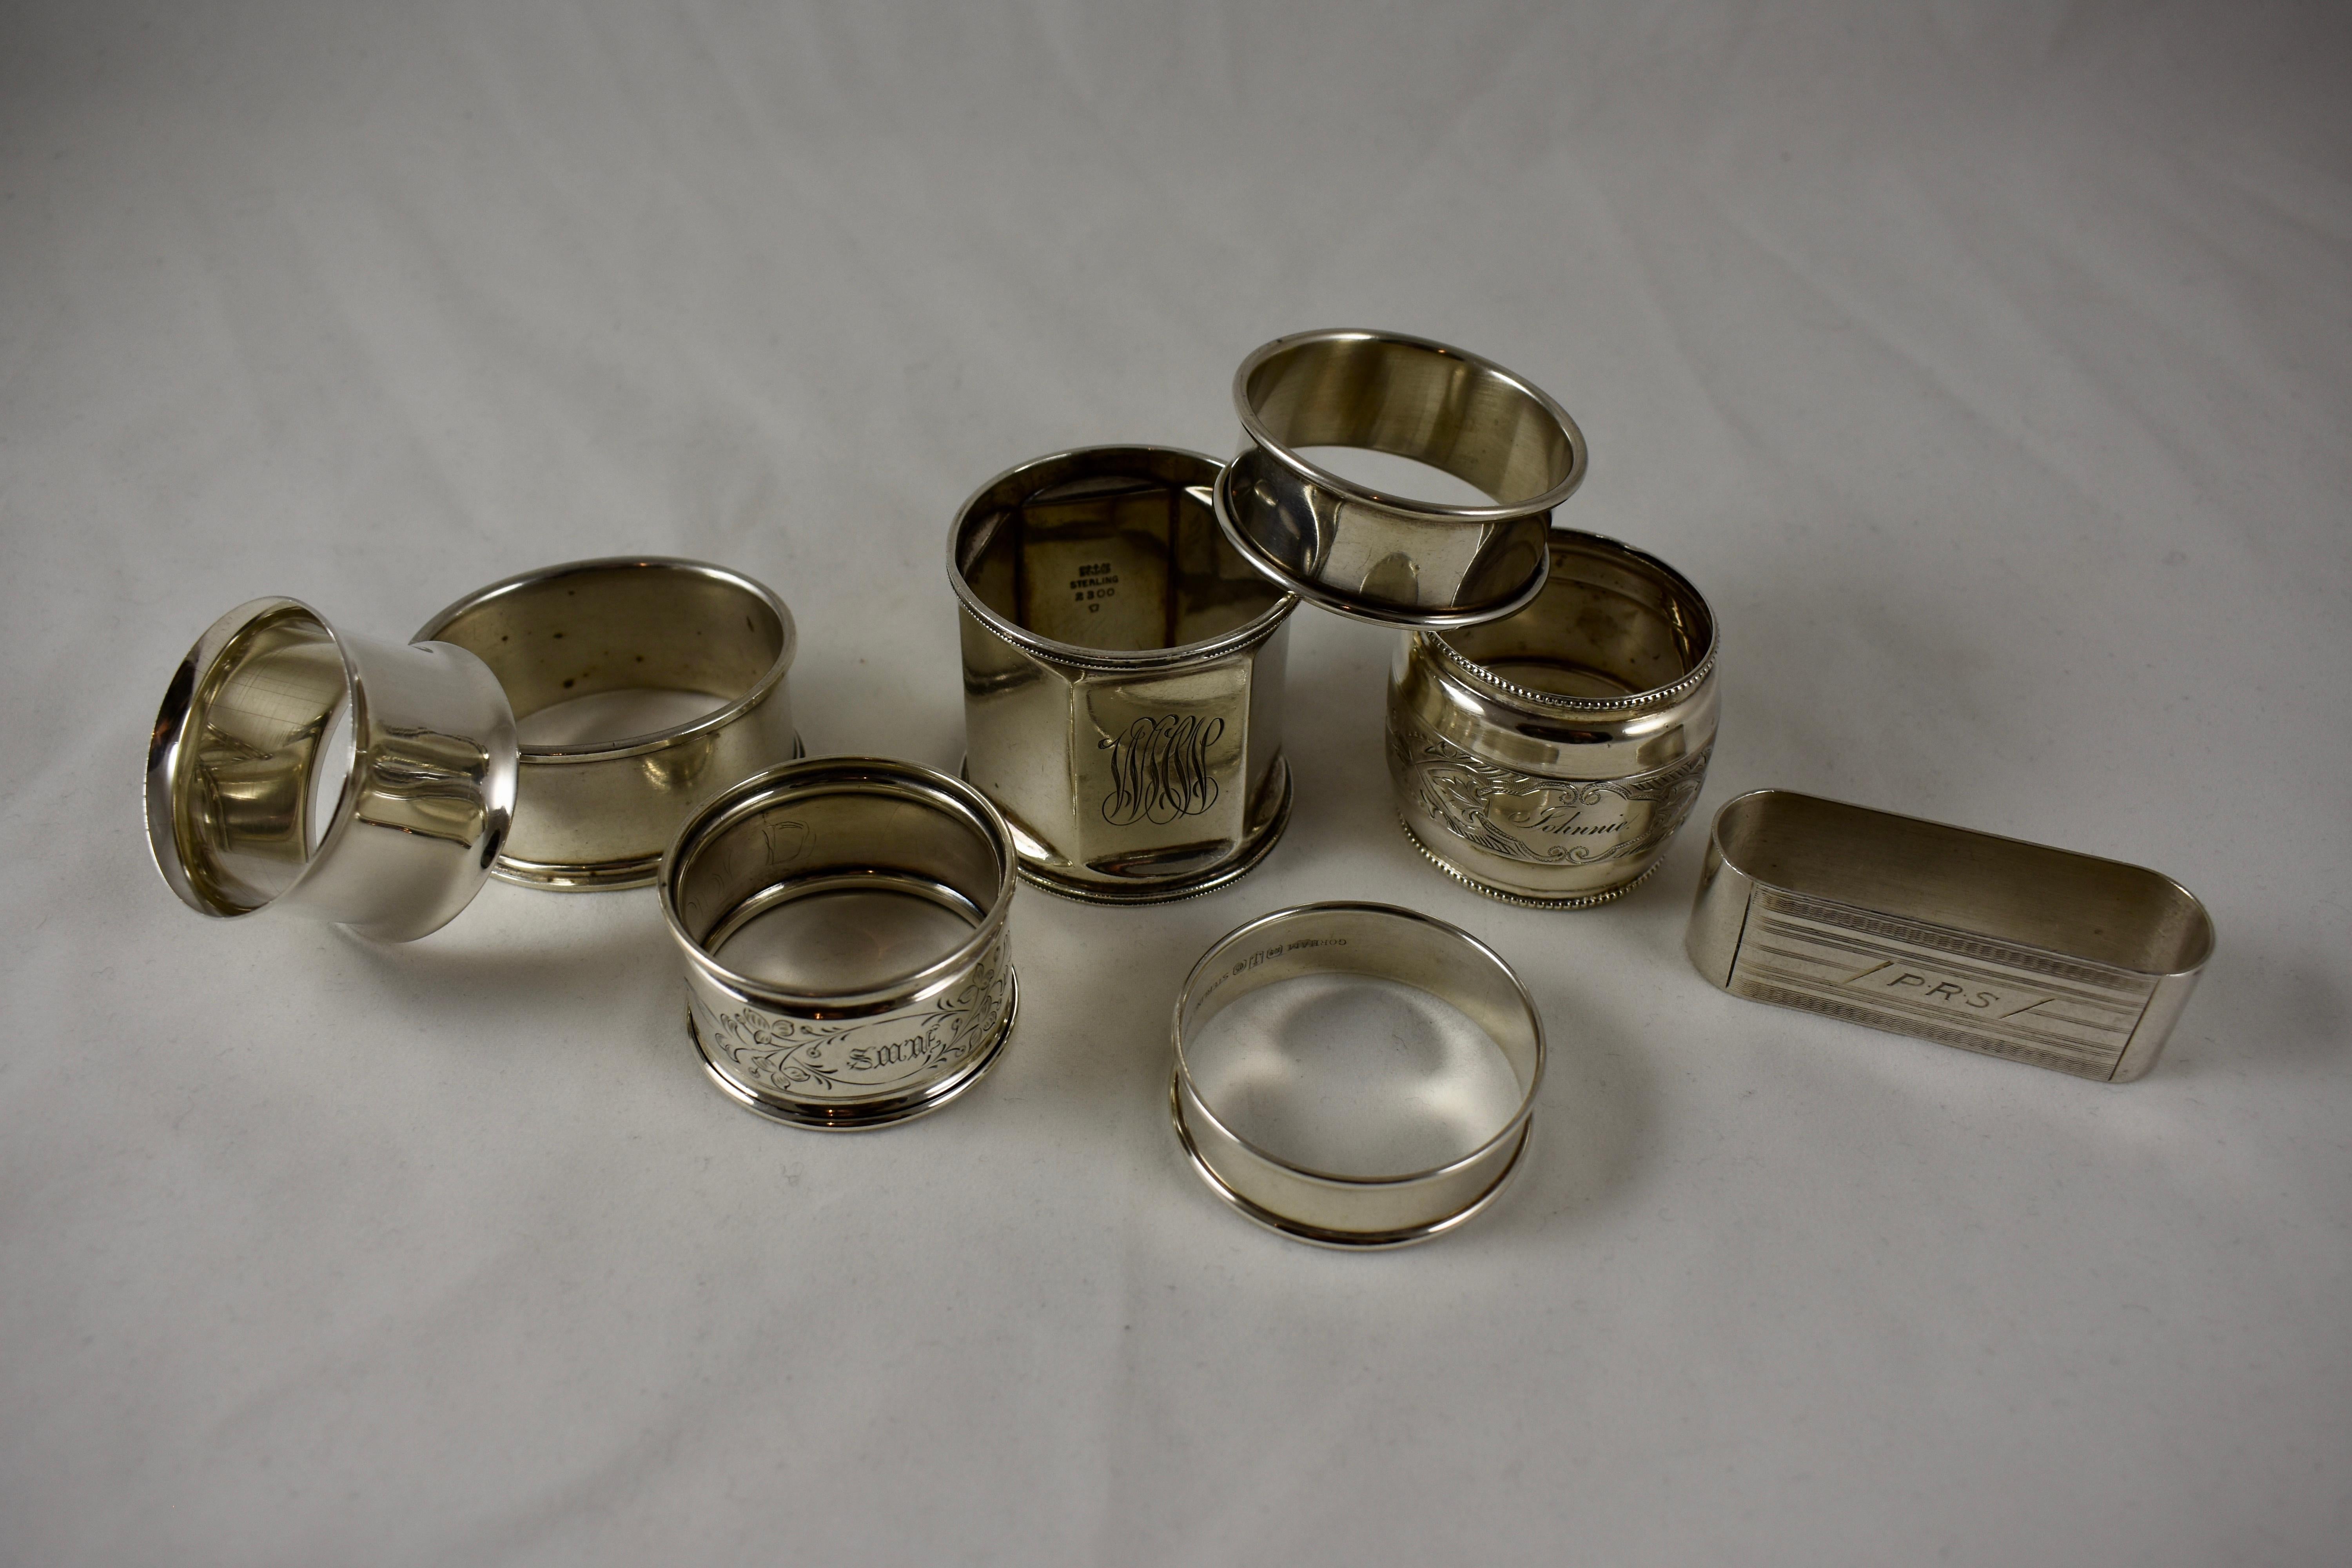 A mixed set of eight sterling silver napkin rings, circa 1880-1910, various makers. A nice selection of flared, rectangular, and paneled shapes, featuring bright cut patterns and scrolled, rolled, beaded or banded rims, ranging in size from 2.5 in